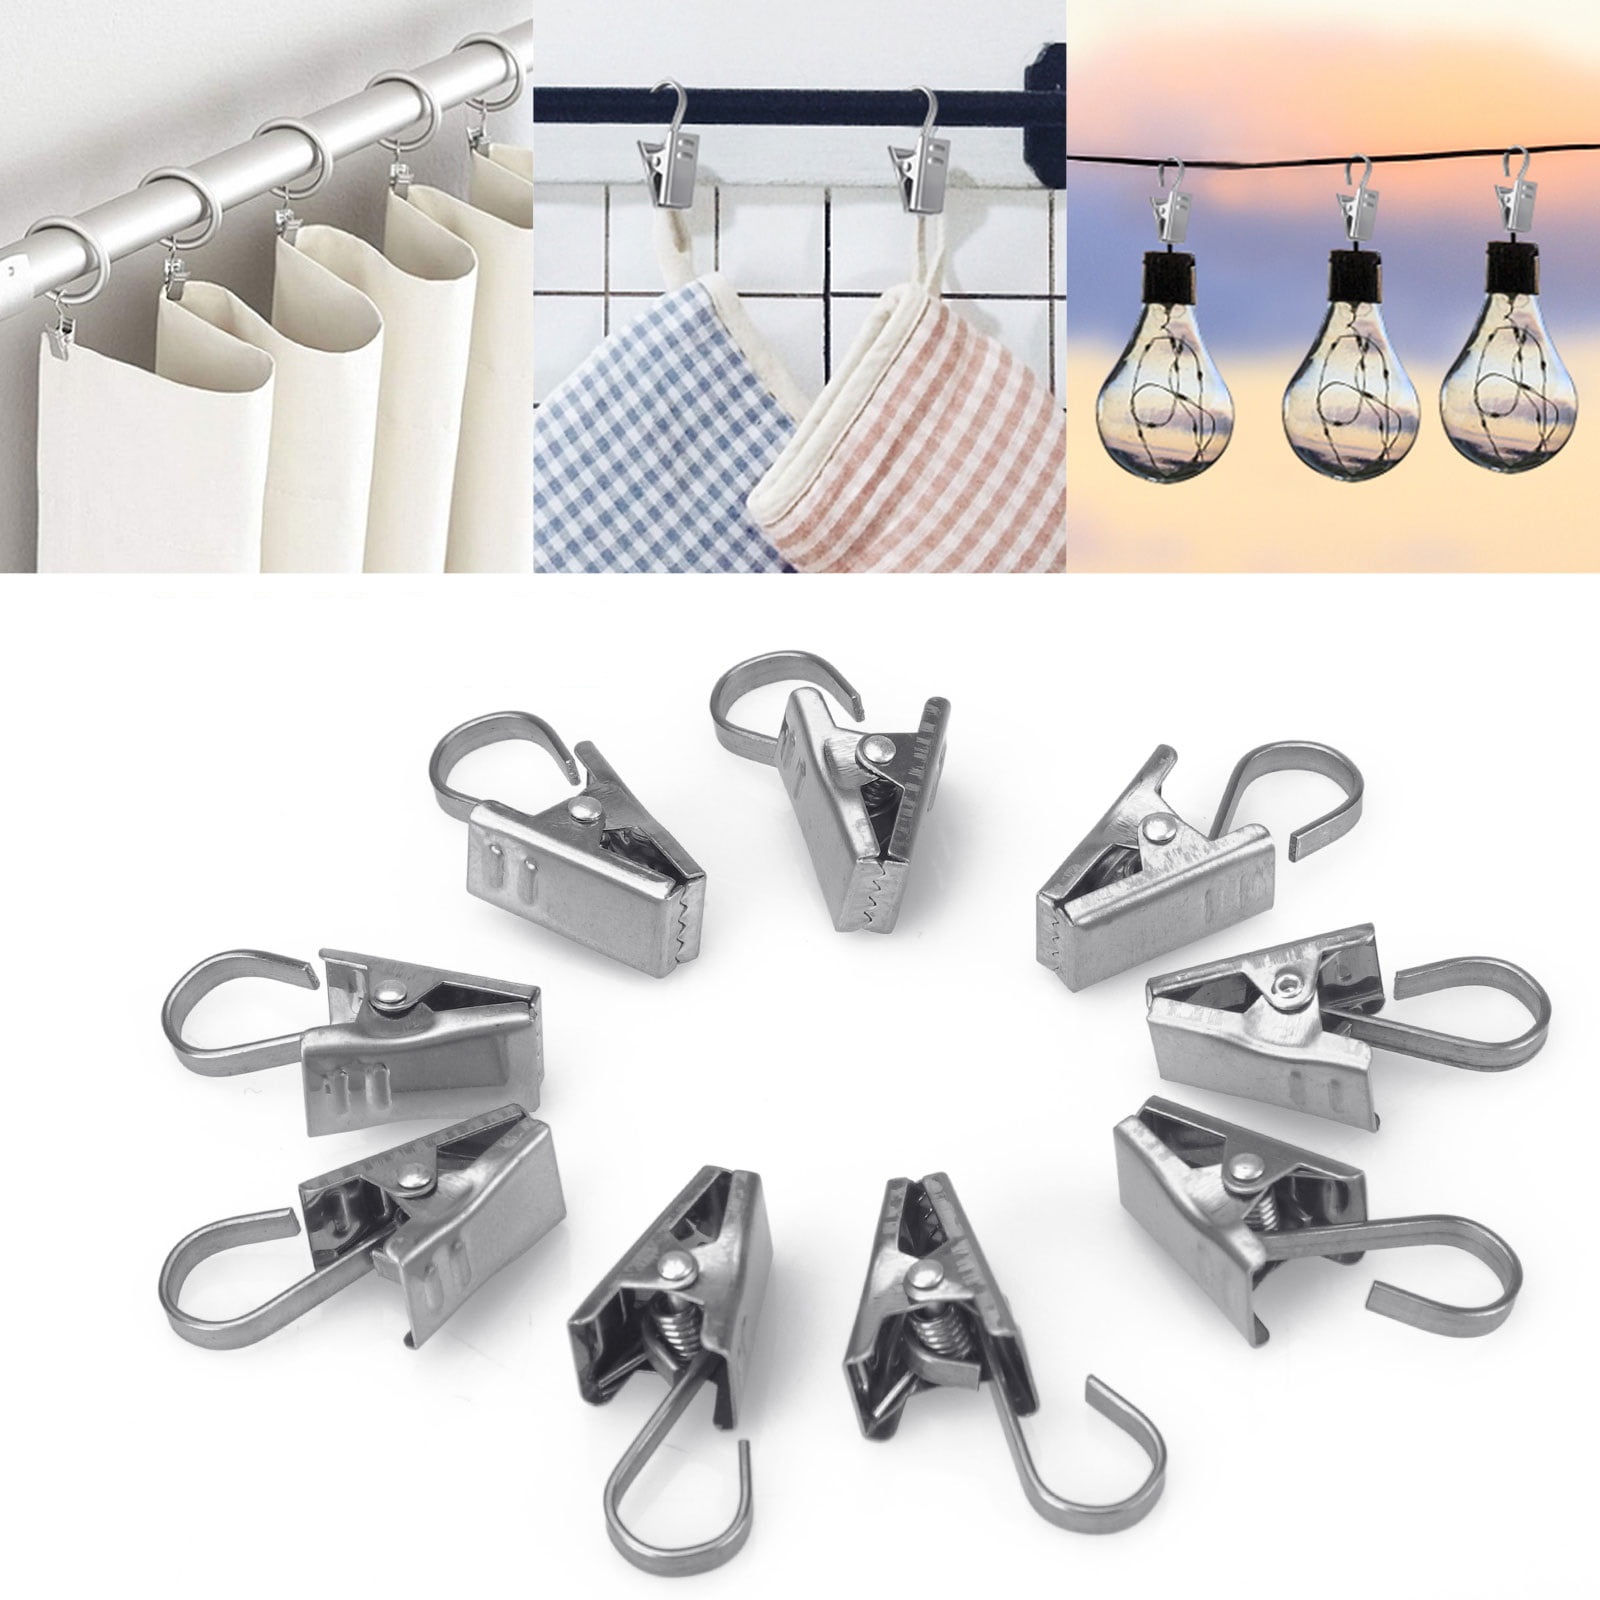 Small Curtain Clips Pack of 30 Hangers Stainless Steel Heavy-Duty Hanging Clamps 